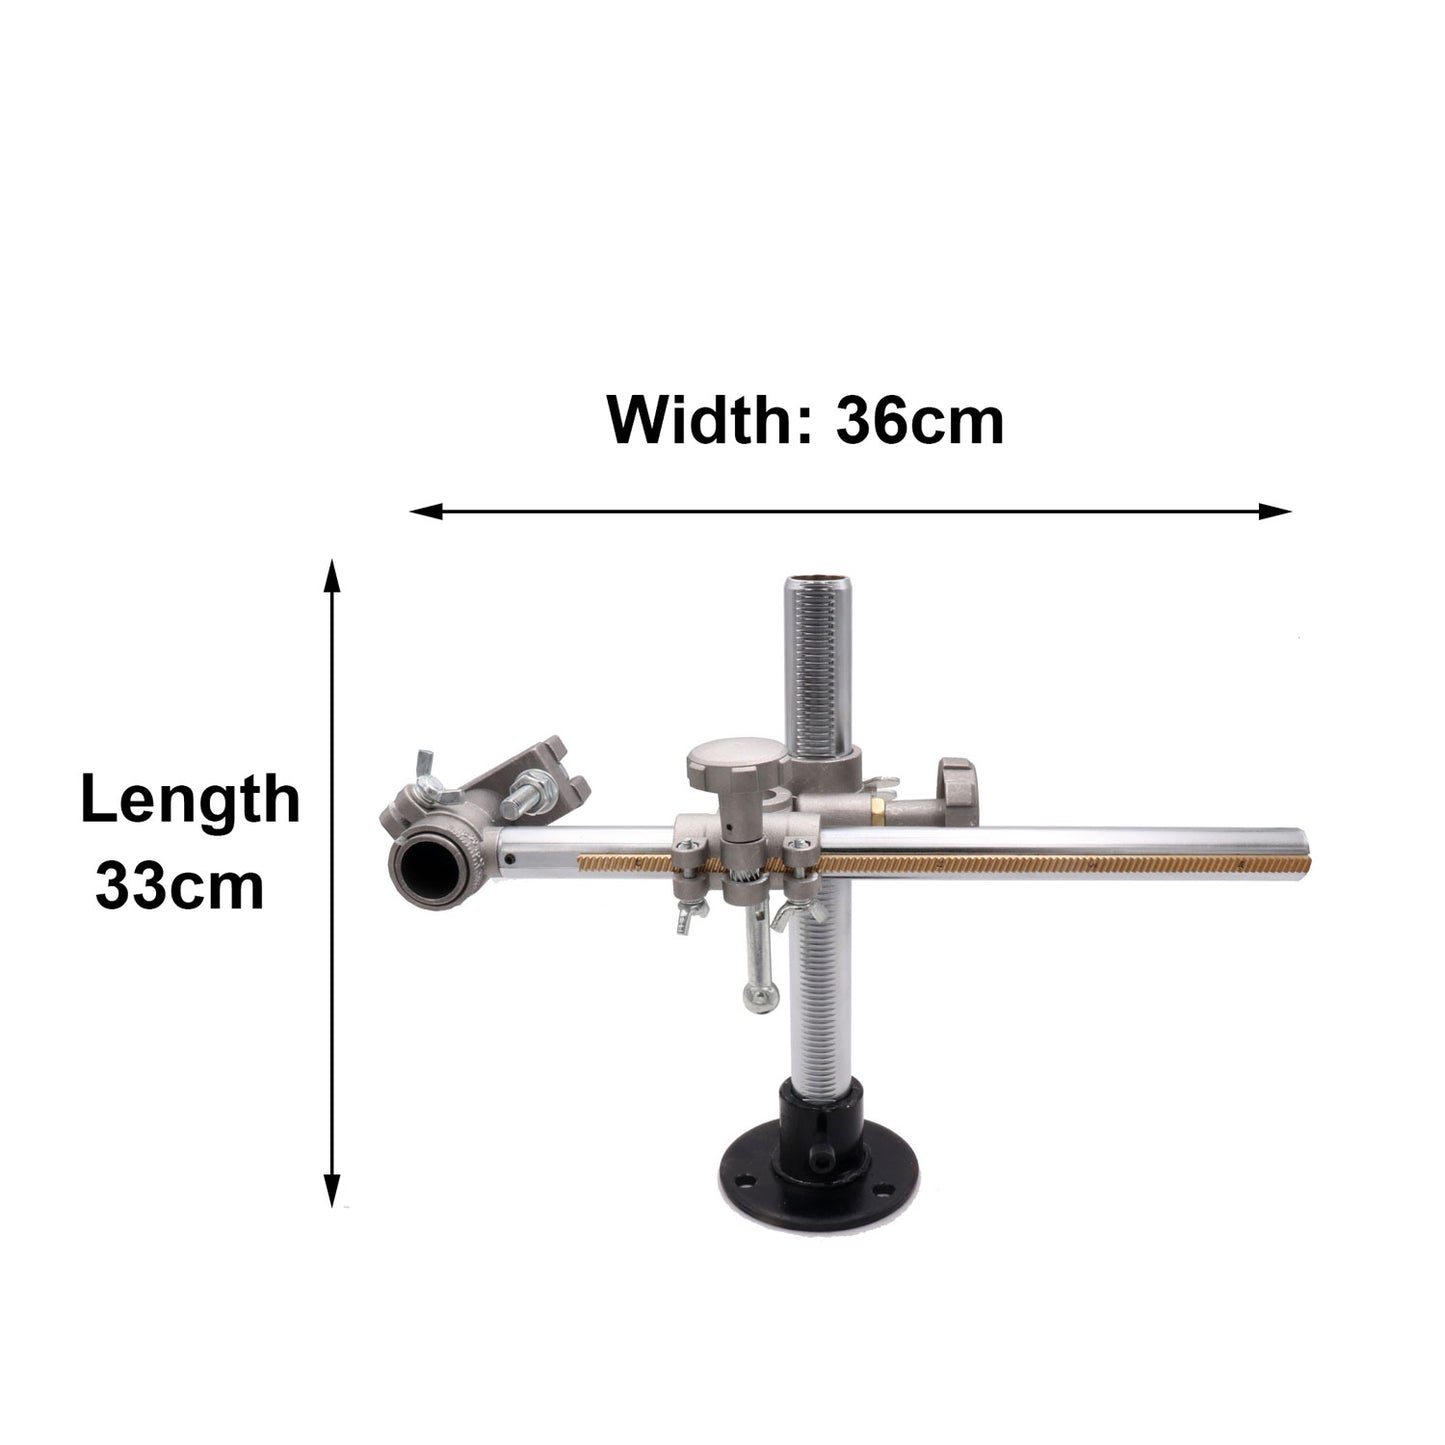 JINSLU Welding Turntable Positioner Torch Holder 50x60cm with Support Clamp Mountings.